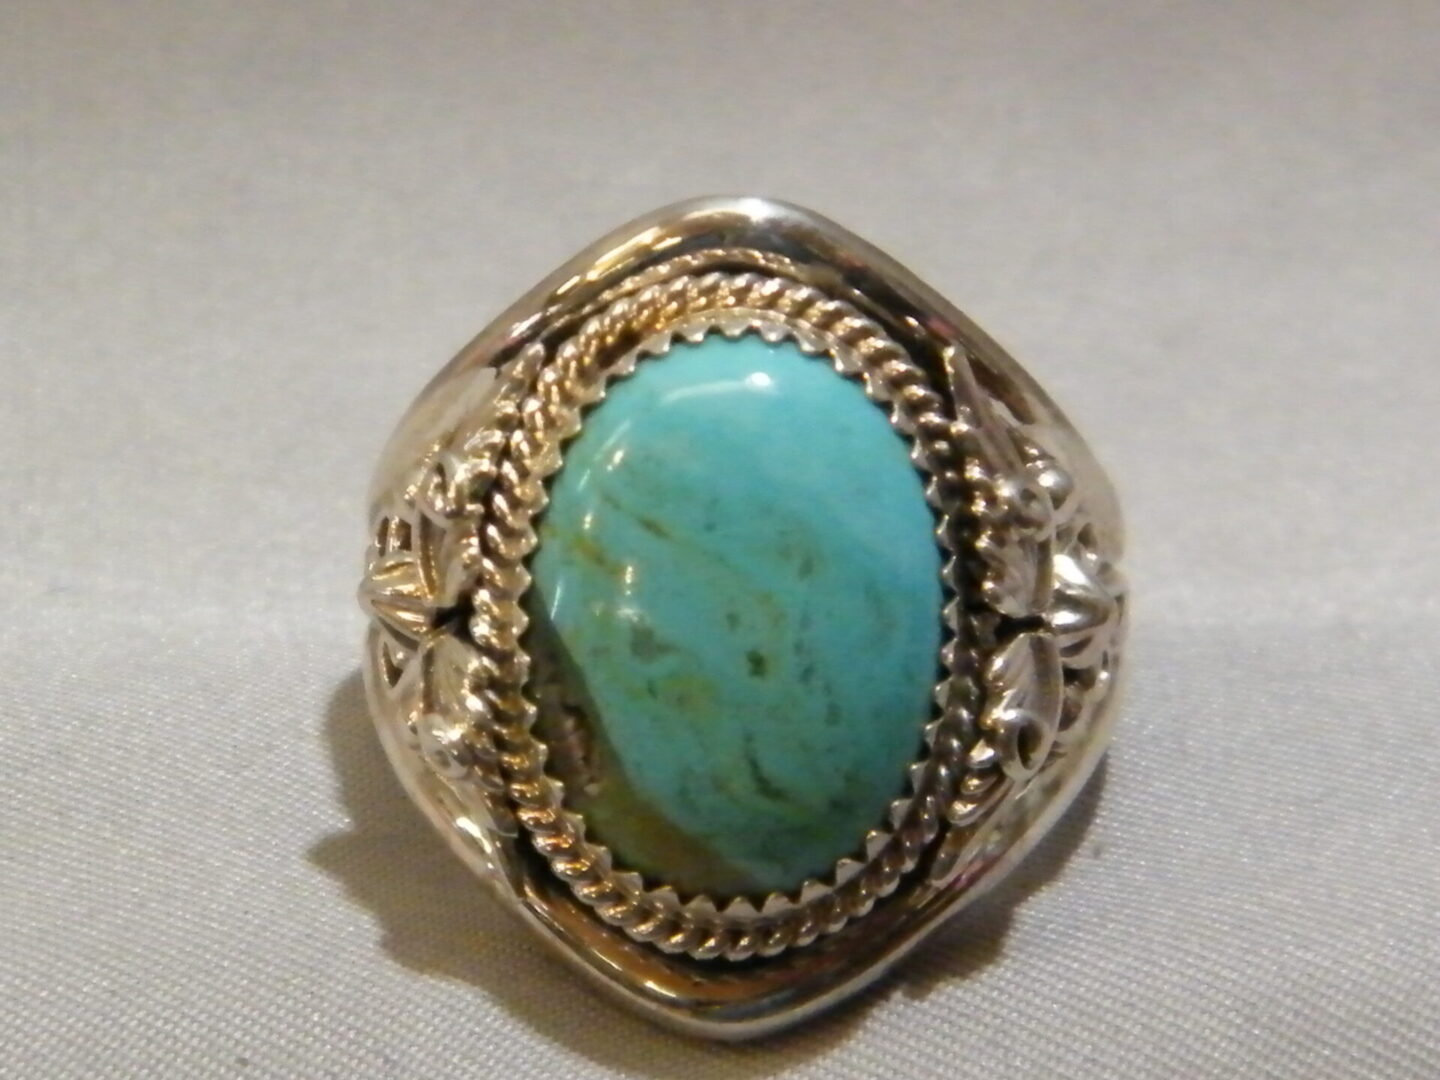 A Silver Color Ring With an Oval Color Ring